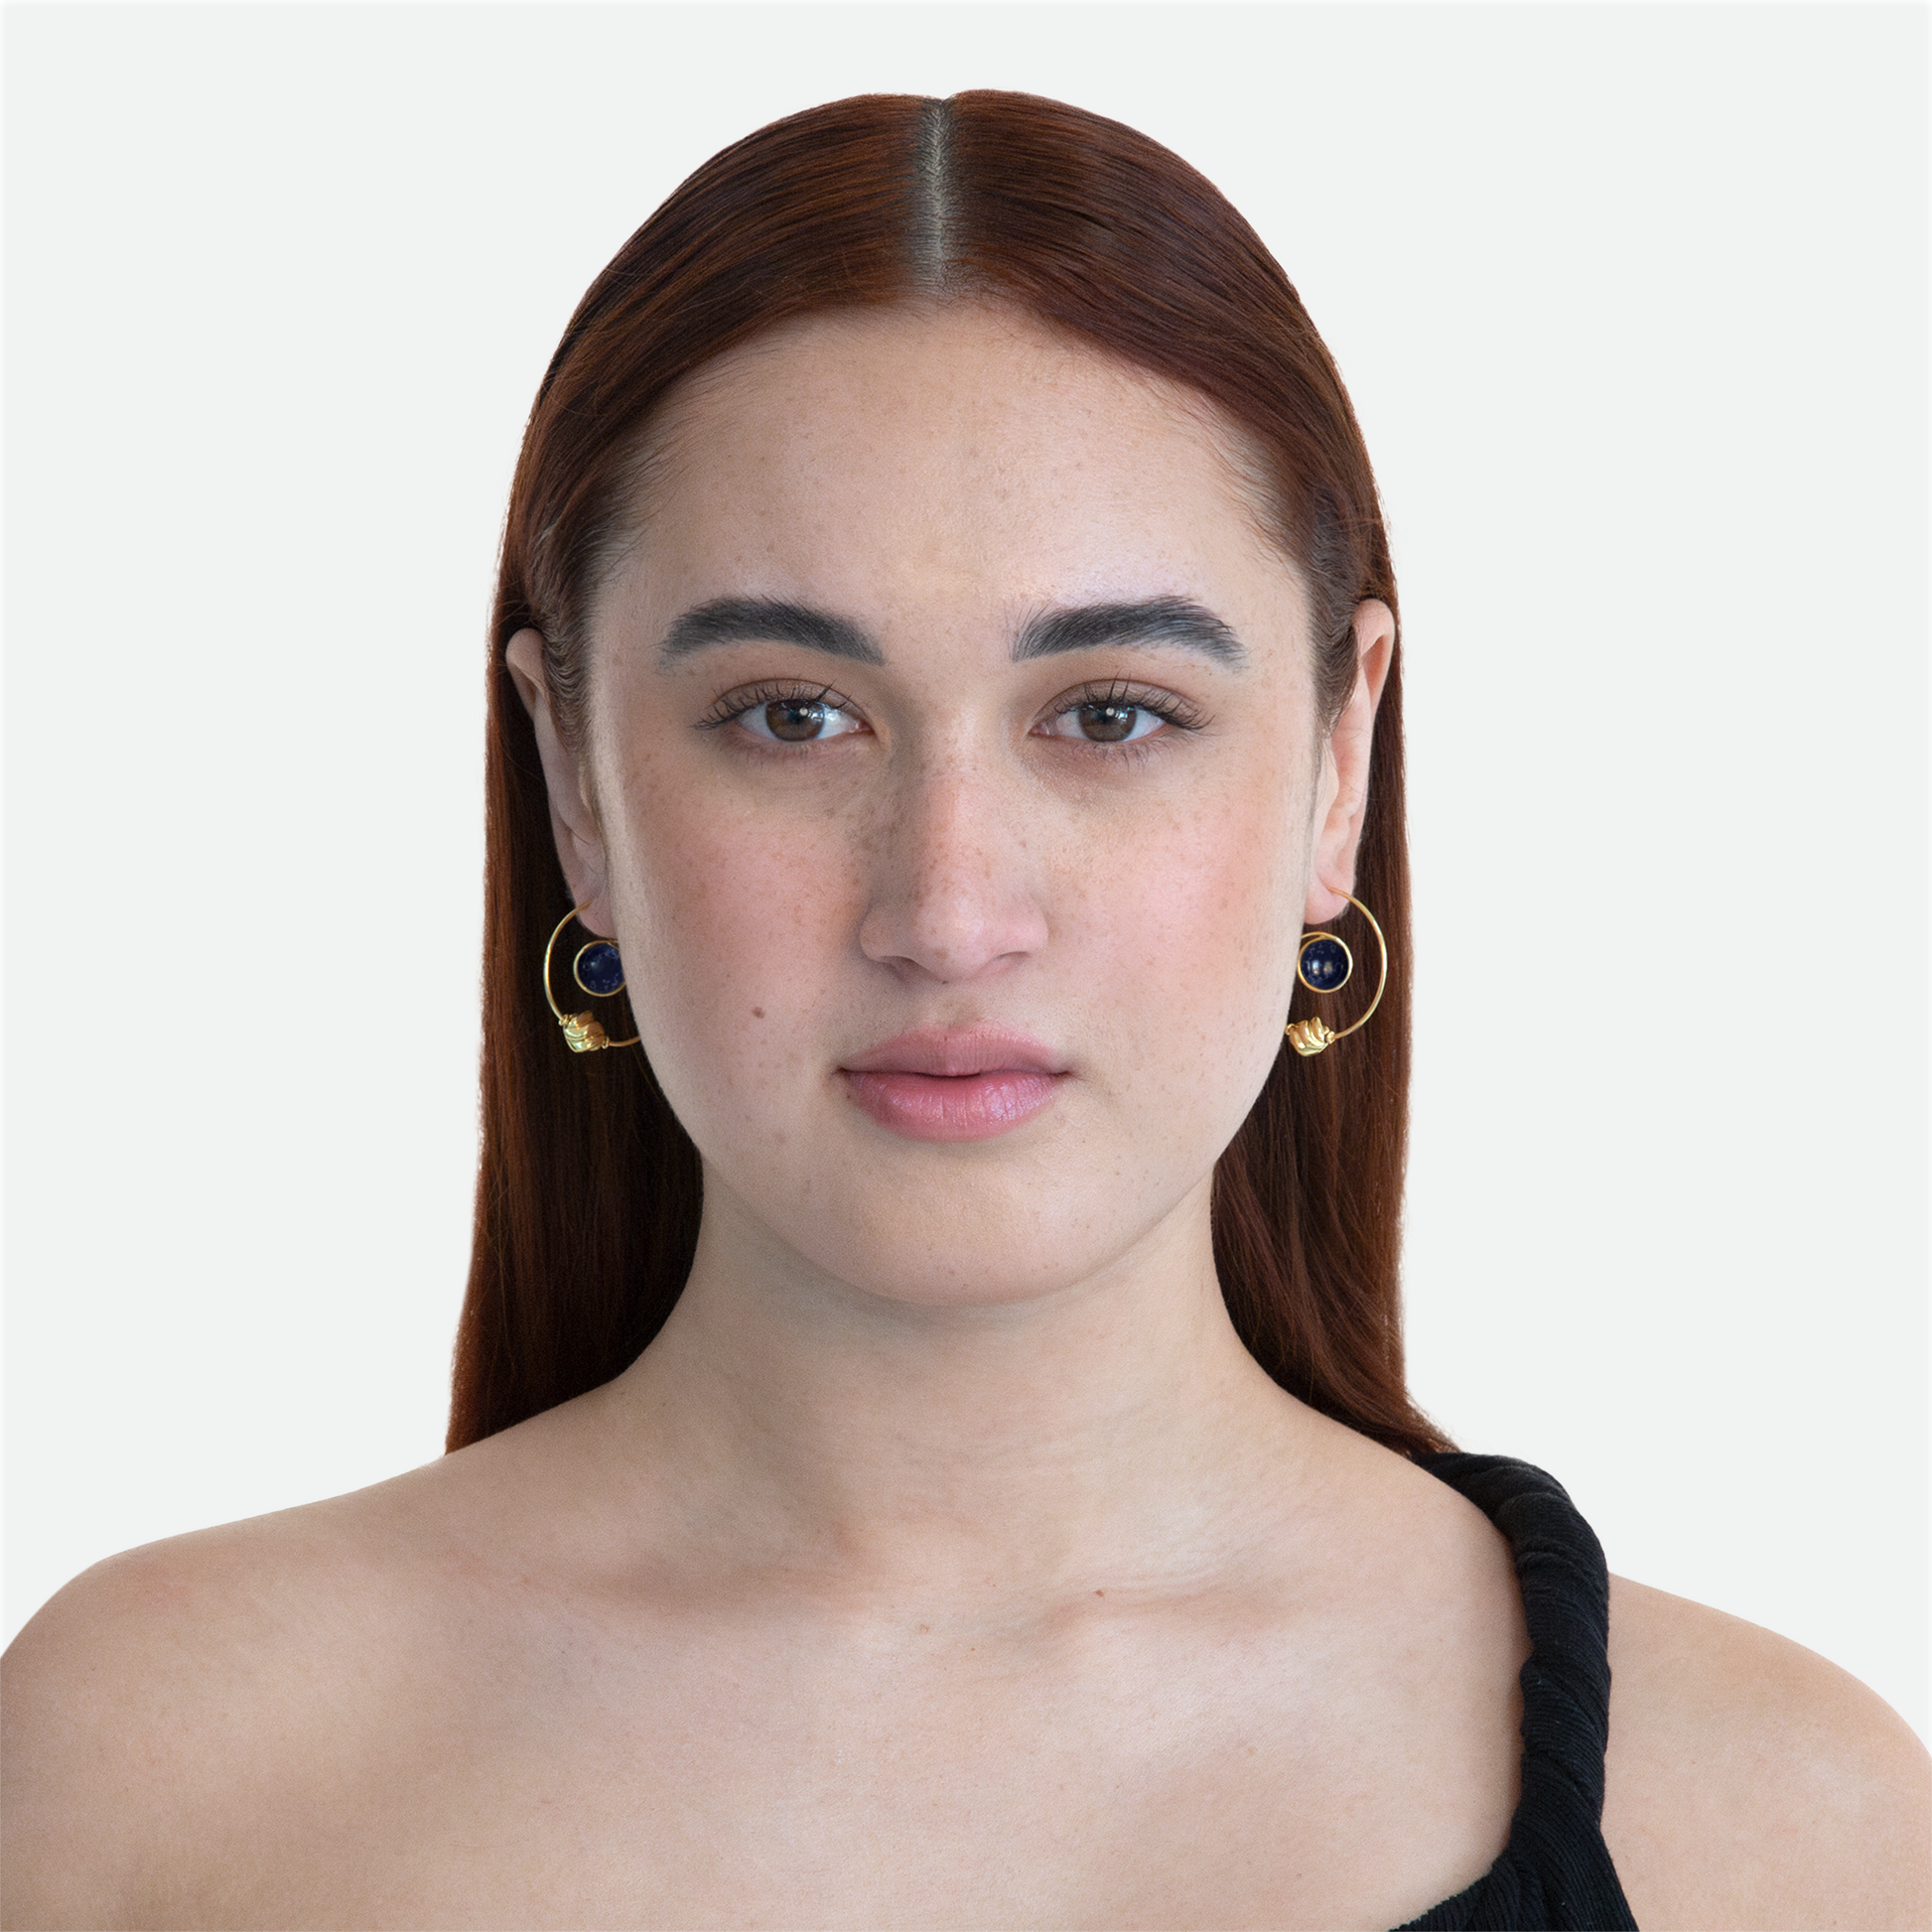 Model showcasing the Orbit earrings, featuring a Sodalite stone and bead combo within a gold plated arc, reflecting celestial pairings, on a white background.